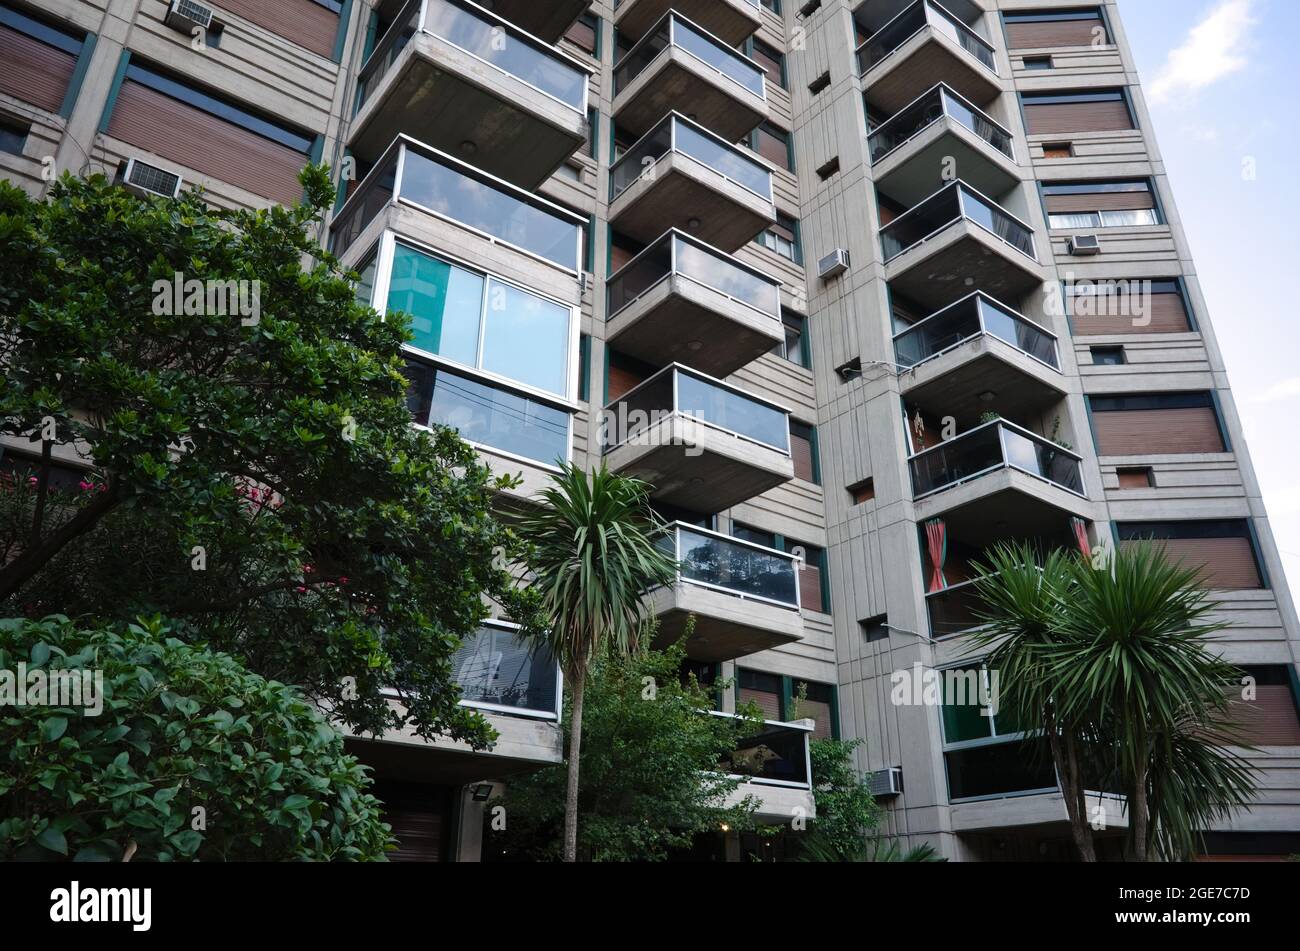 Exterior of modern multi-storey residential building in Cordoba, Argentina with glass balconies and typical Argentinian outside blinds on windows Stock Photo